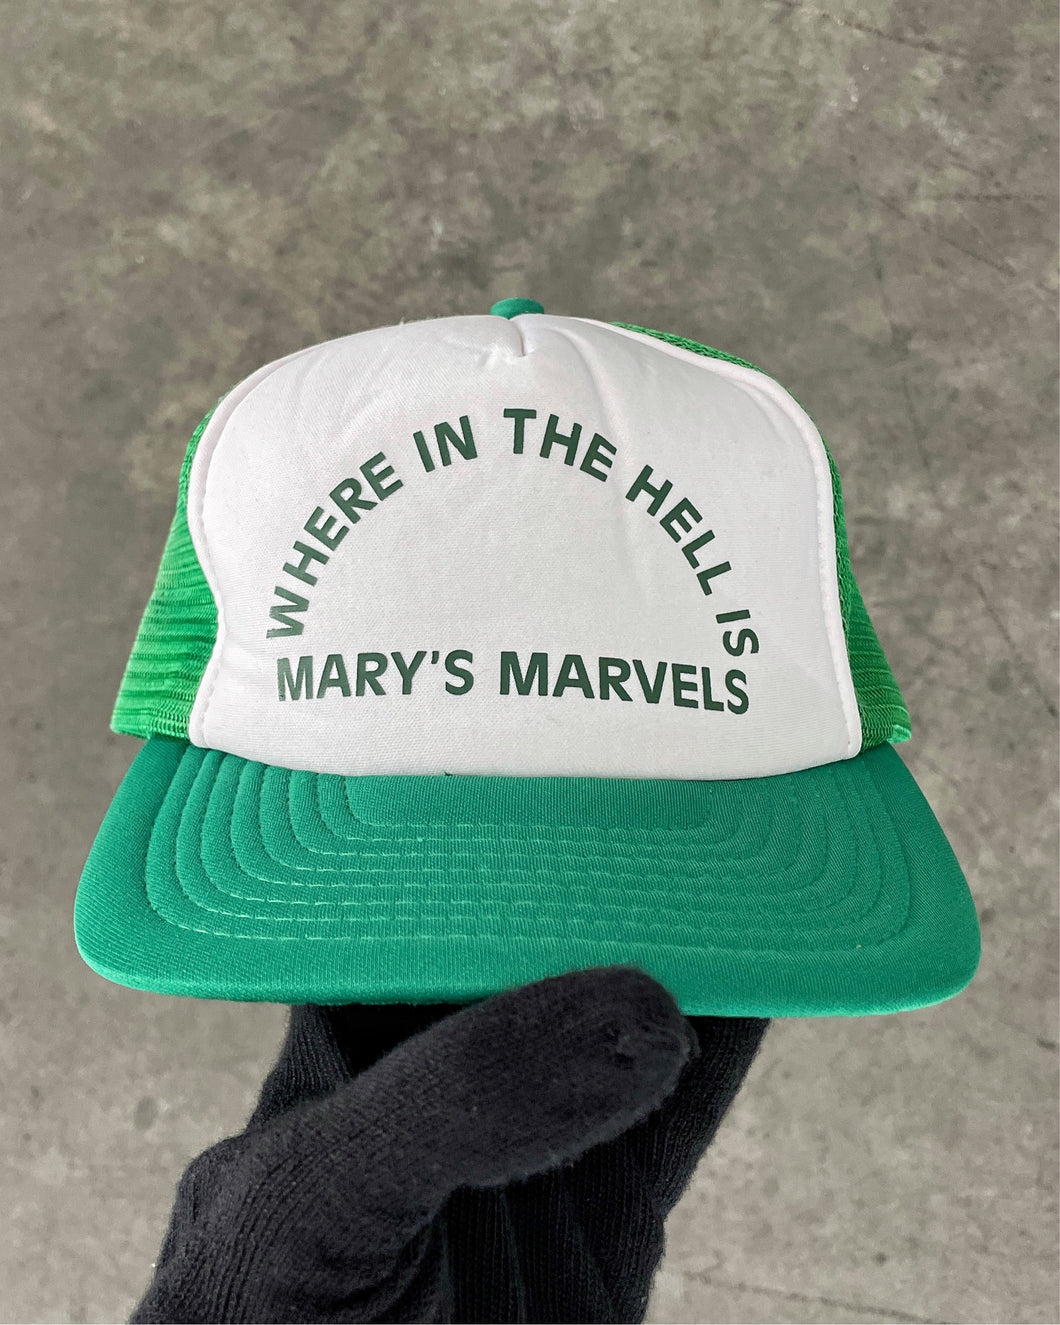 “WHERE IN THE HELL IS MARY’S MARVELS” FOAM TRUCKER HAT - 1990S / 1980S